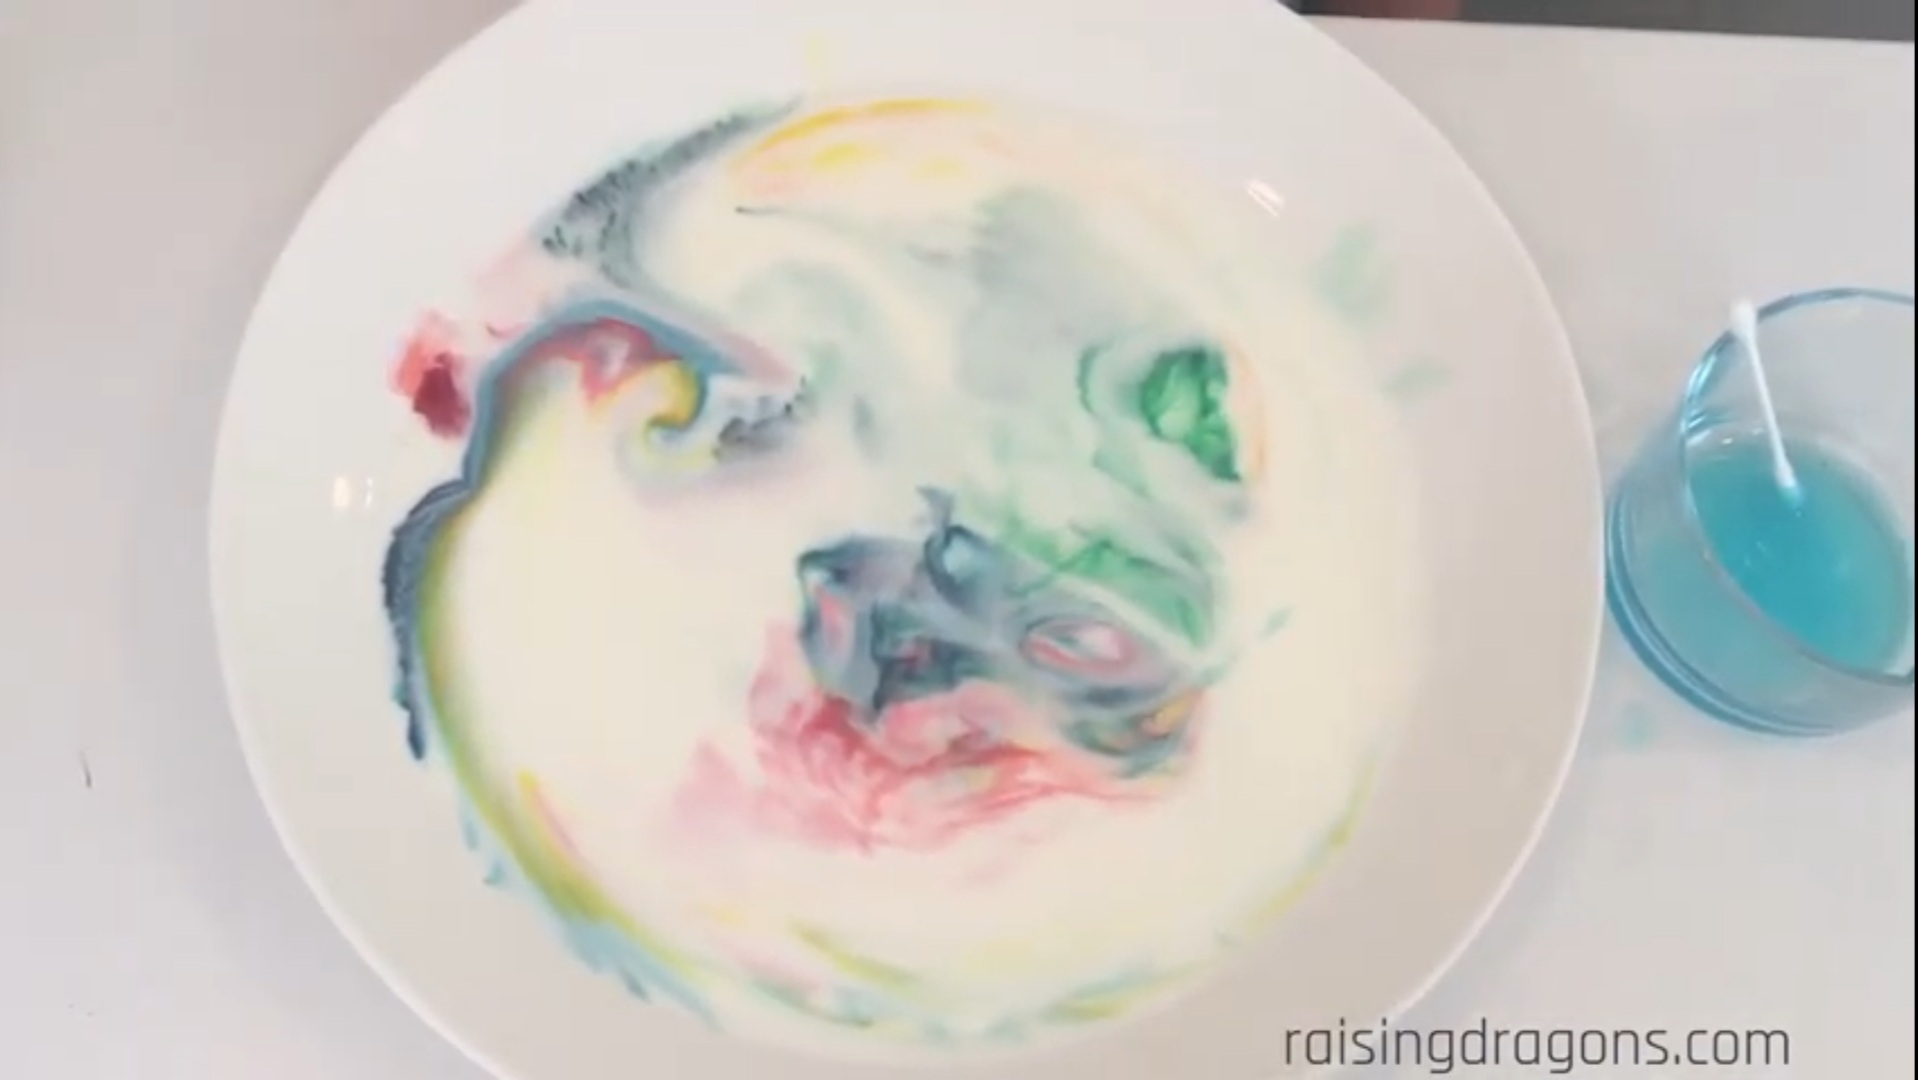 5 Fun & Cool Science Activities with Dye to Do With the Kids 4